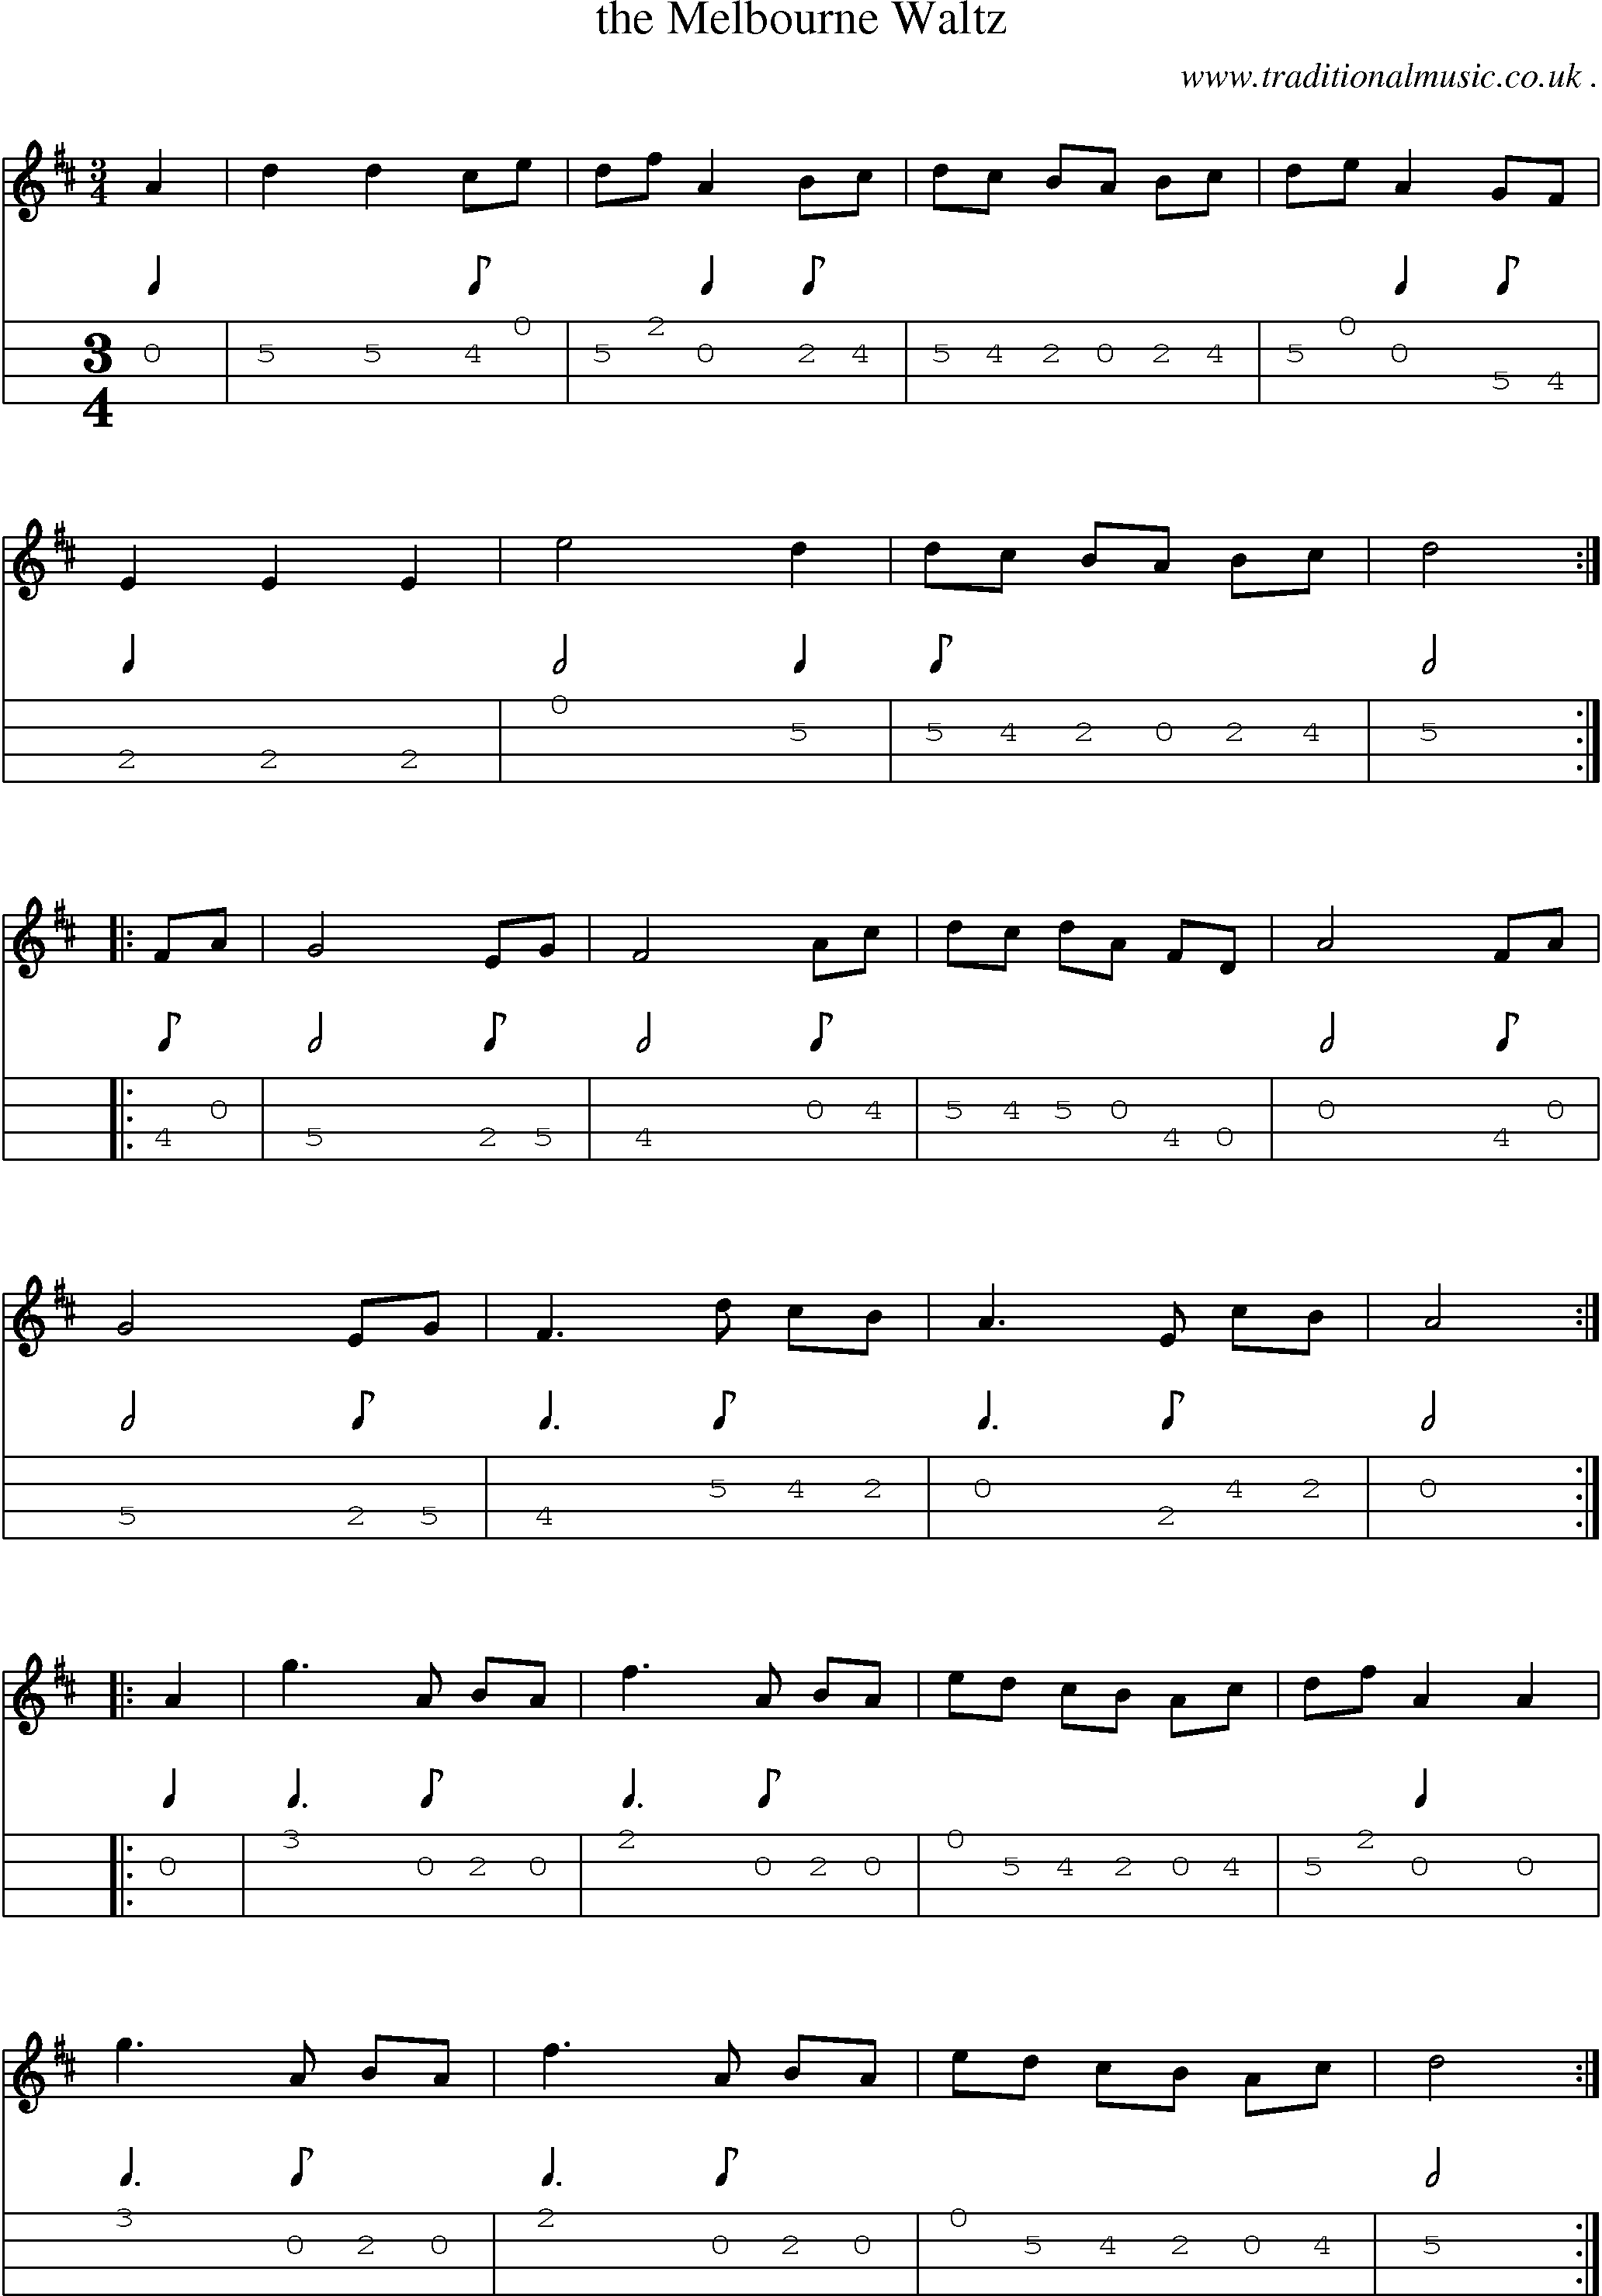 Sheet-Music and Mandolin Tabs for The Melbourne Waltz